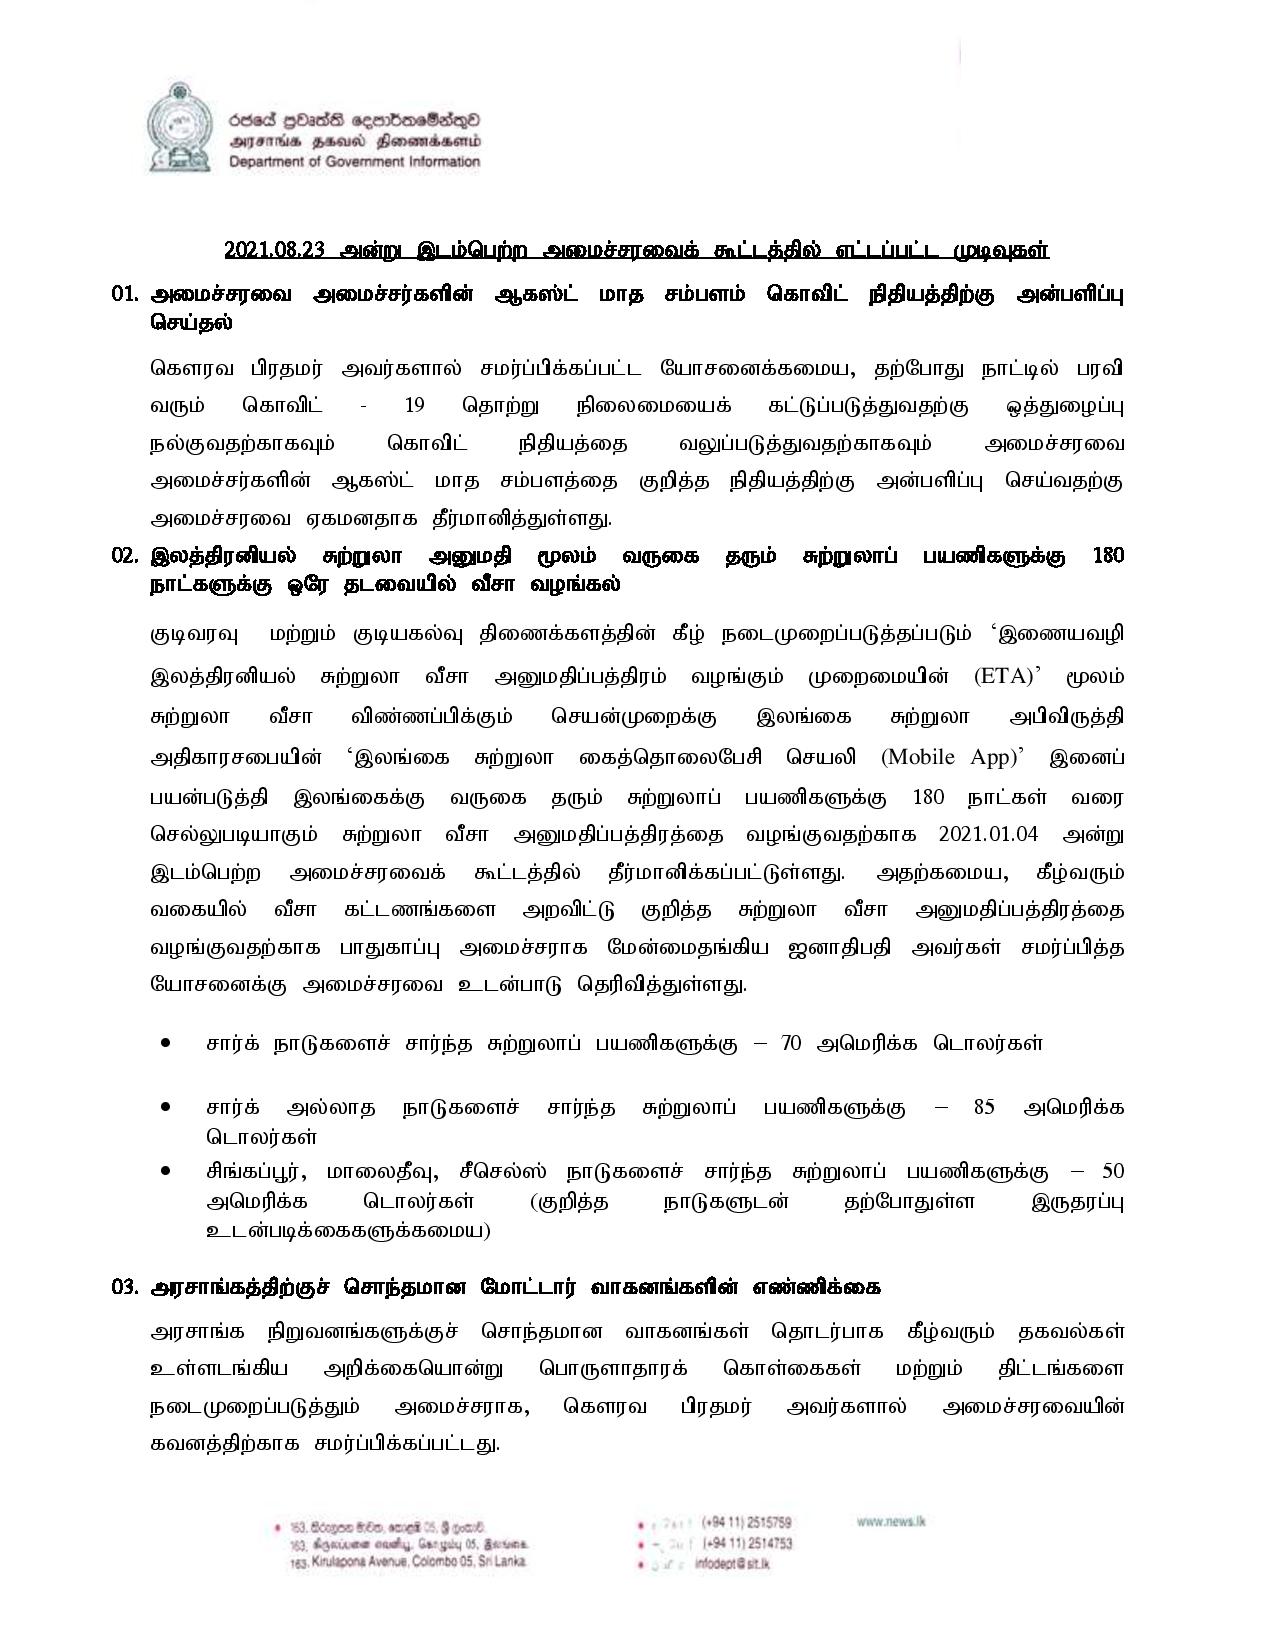 Canbinet Decision on 23.08.2021 Tamil page 001 1